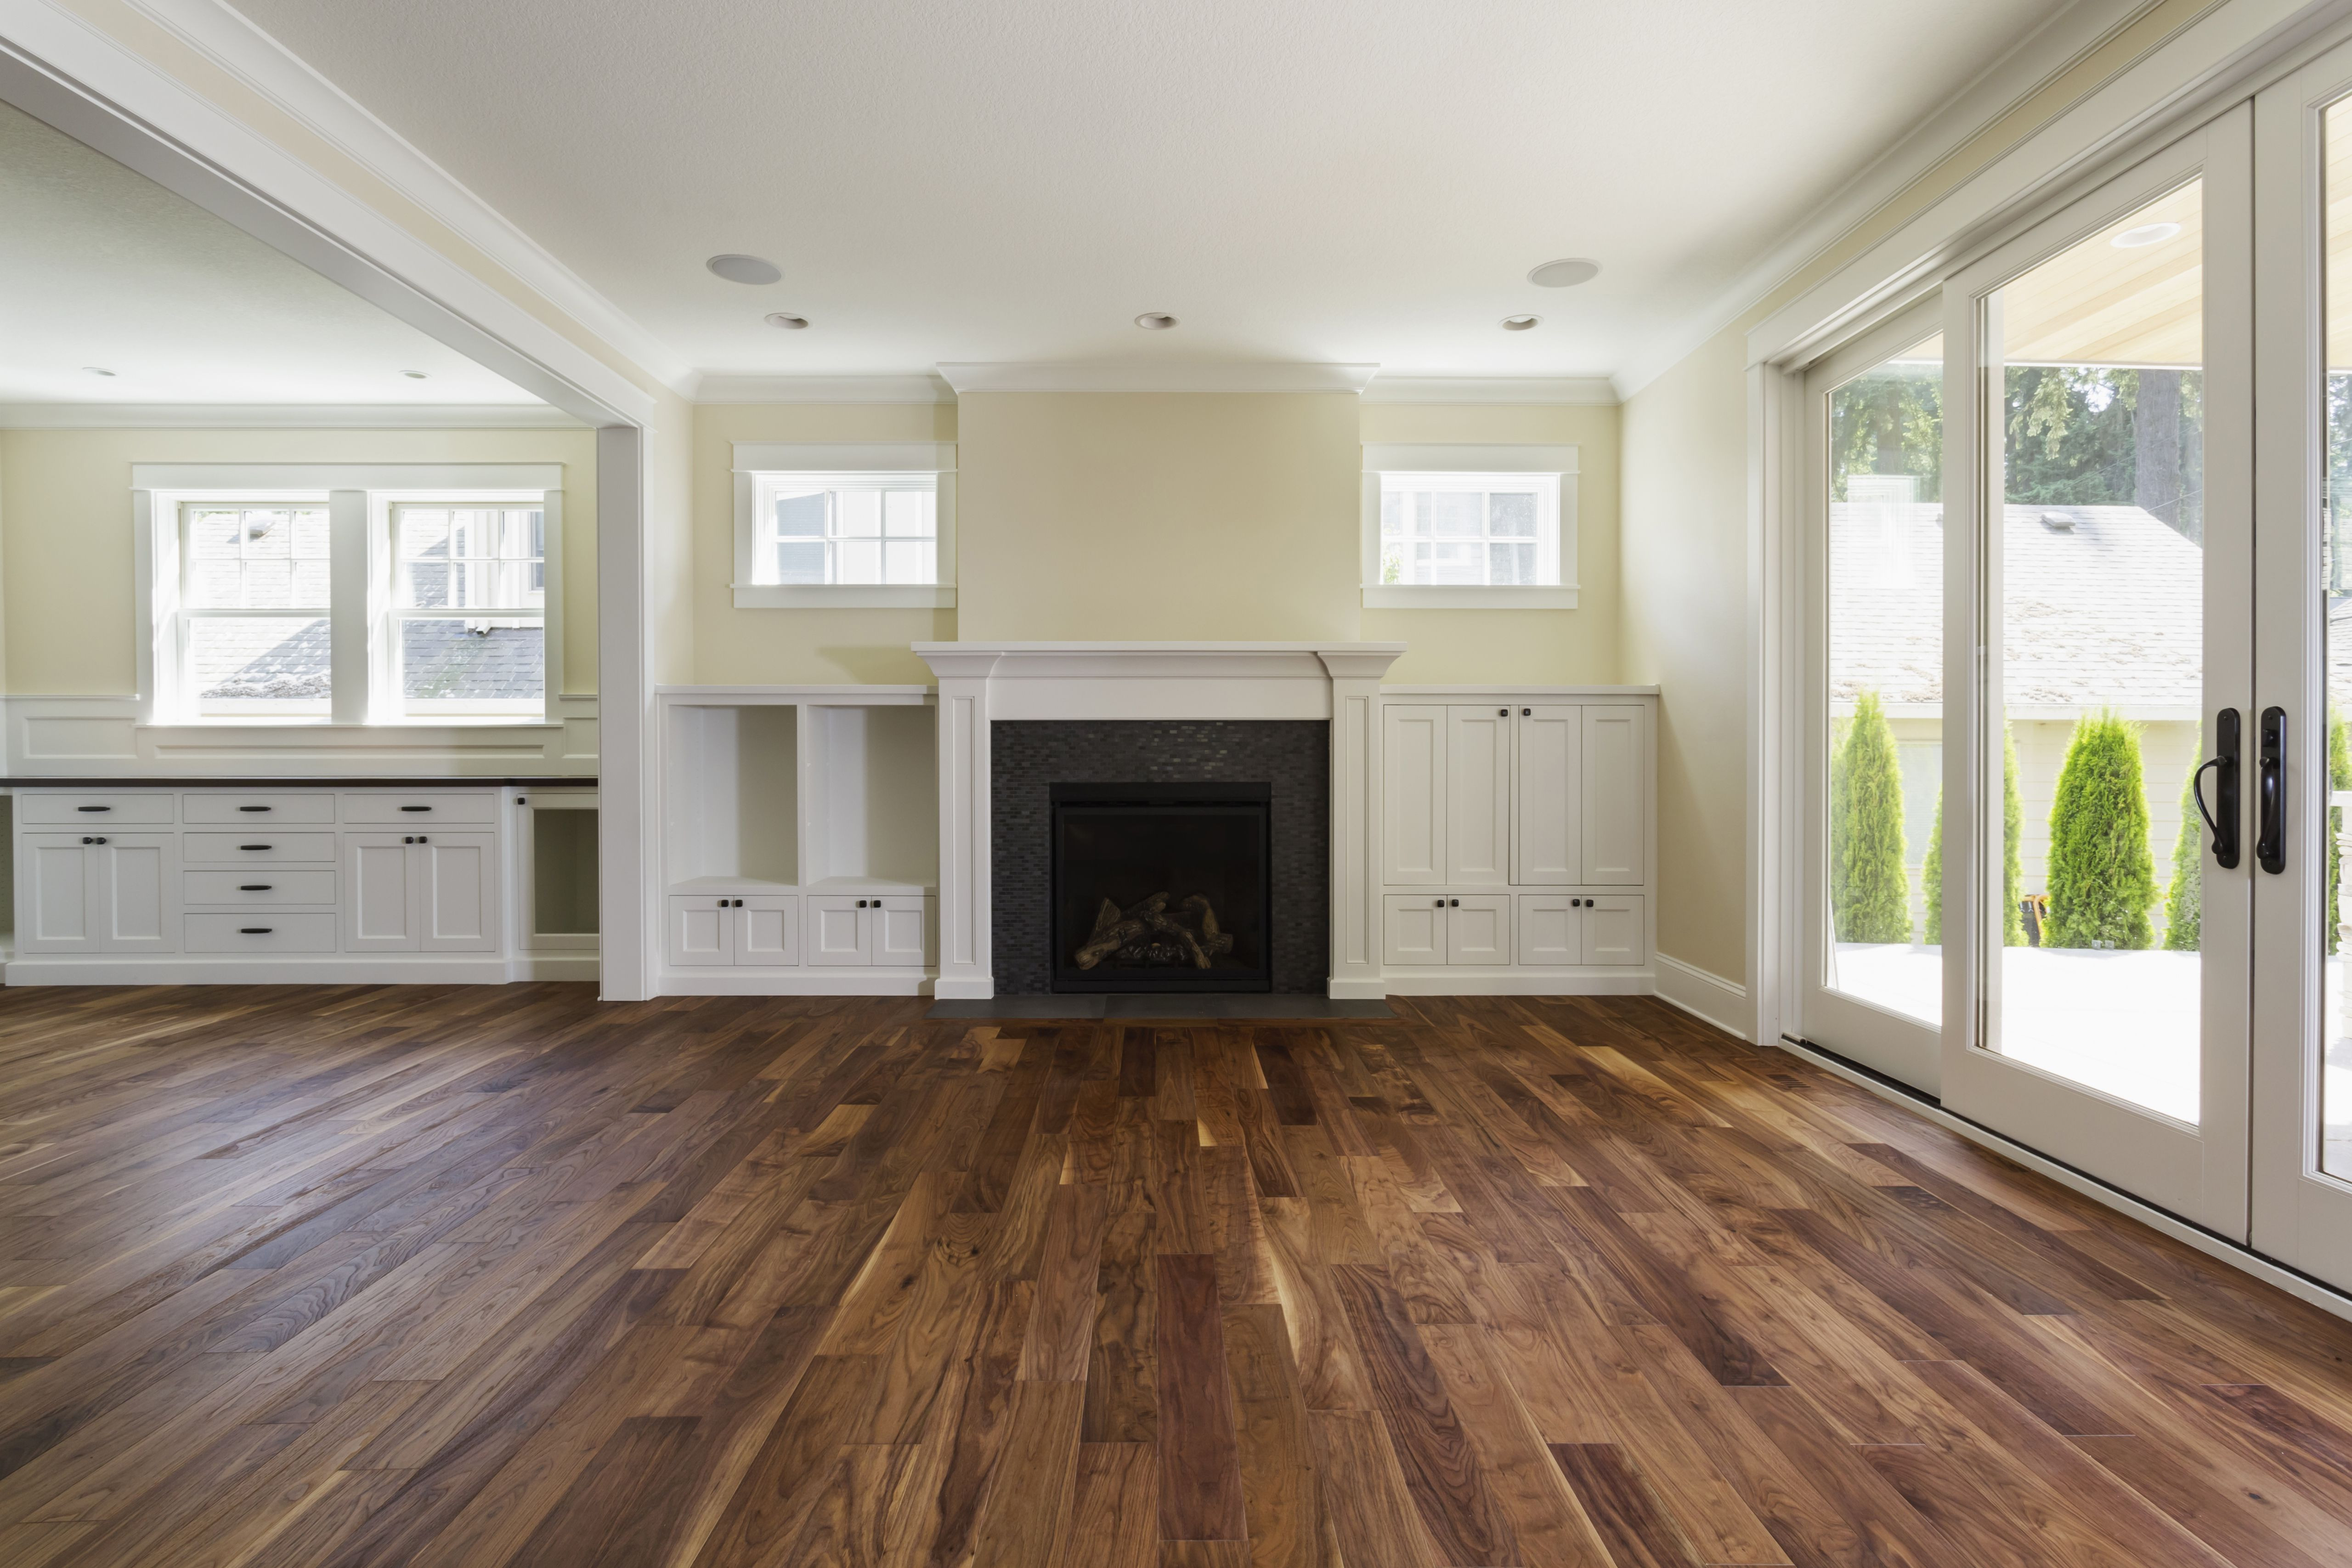 cost to install hardwood floors on stairs of the pros and cons of prefinished hardwood flooring throughout fireplace and built in shelves in living room 482143011 57bef8e33df78cc16e035397